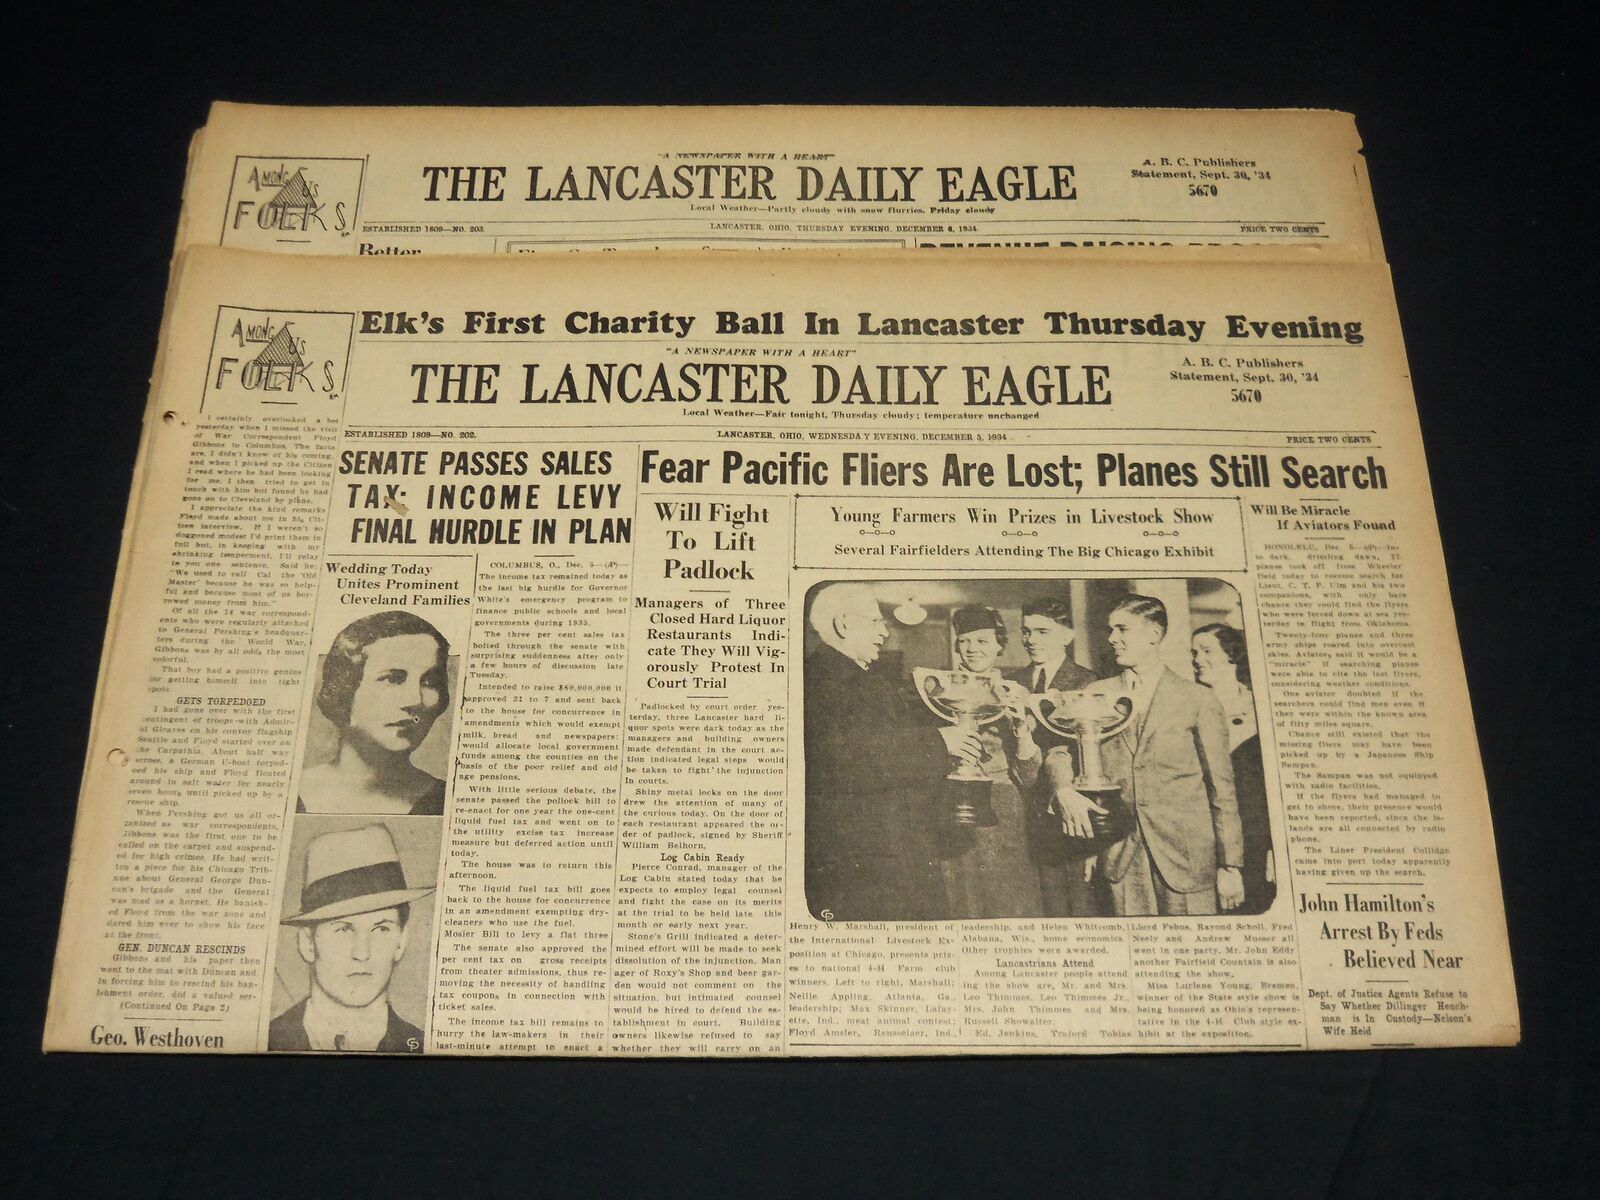 1934 THE LANCASTER DAILY EAGLE NEWSPAPER LOT OF 2 ISSUES - OHIO - NP 4860